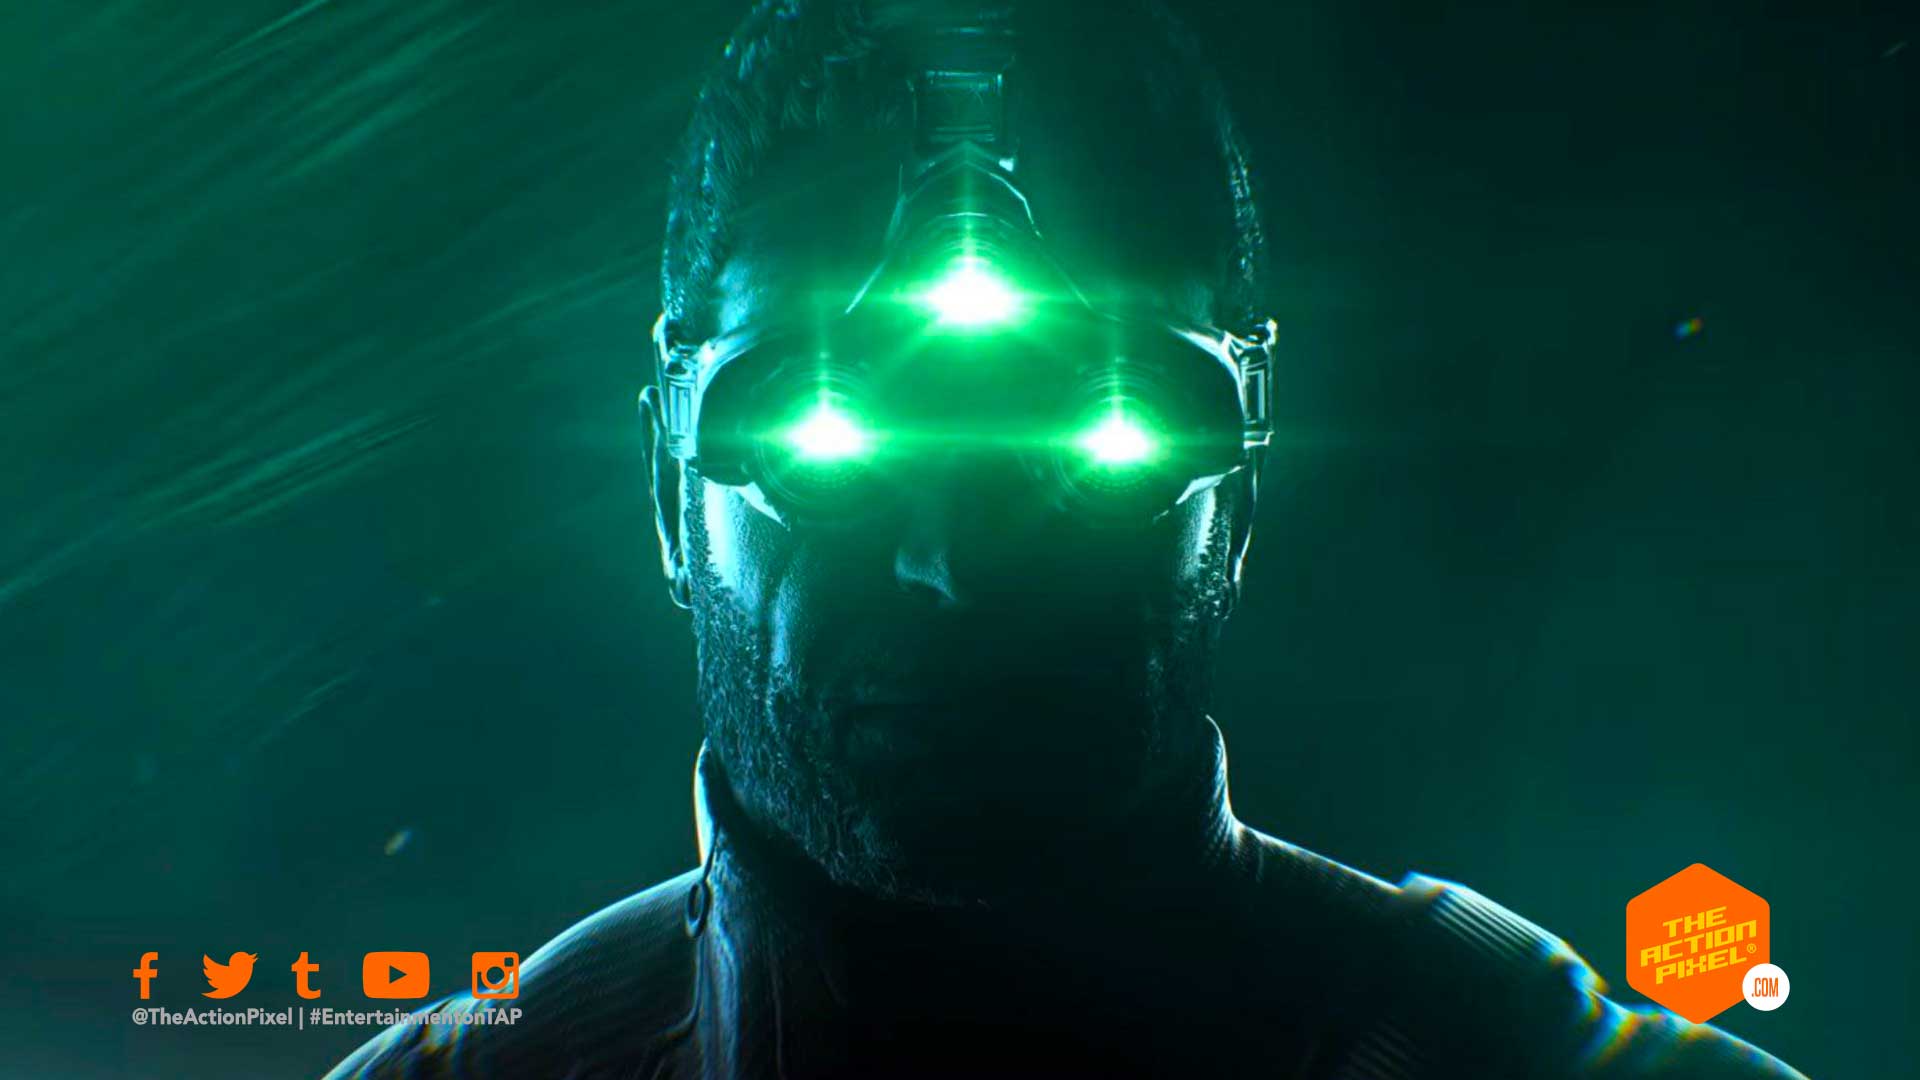 splinter cell memes, splinter cell, tom clancy, tom clancy's splinter cell, splinter cell anime, splinter cell anime series, anime series, netflix anime series, netflix anime, netflix splinter cell anime, splinter cell animated series, upcoming netflix shows, entertainment on tap, the action pixel, featured, entertainment on tap